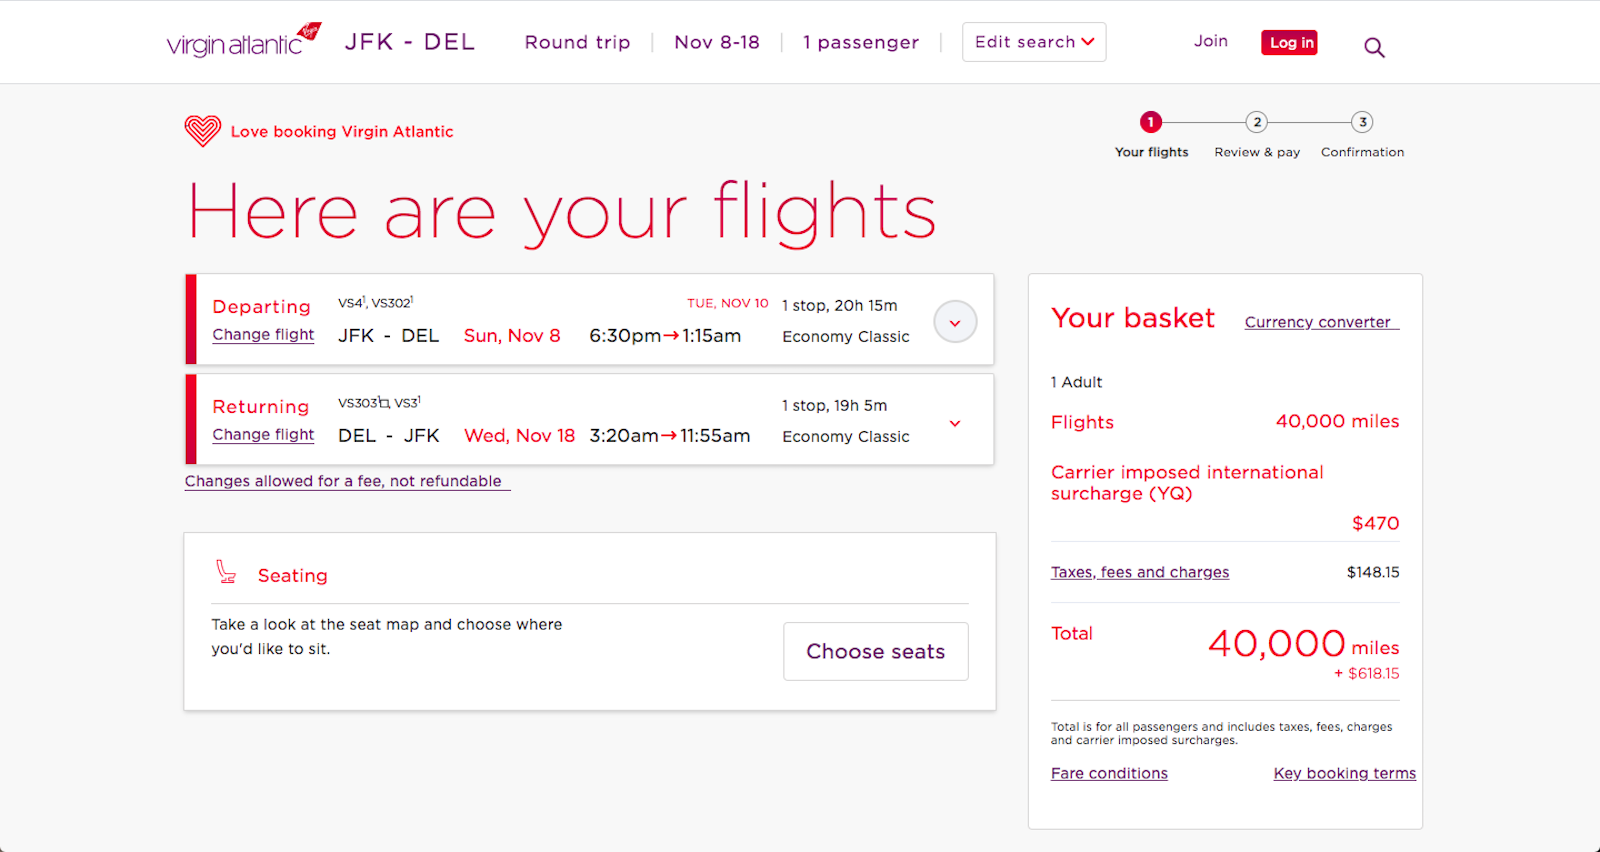 Virgin Atlantic is a bad option for these flights.